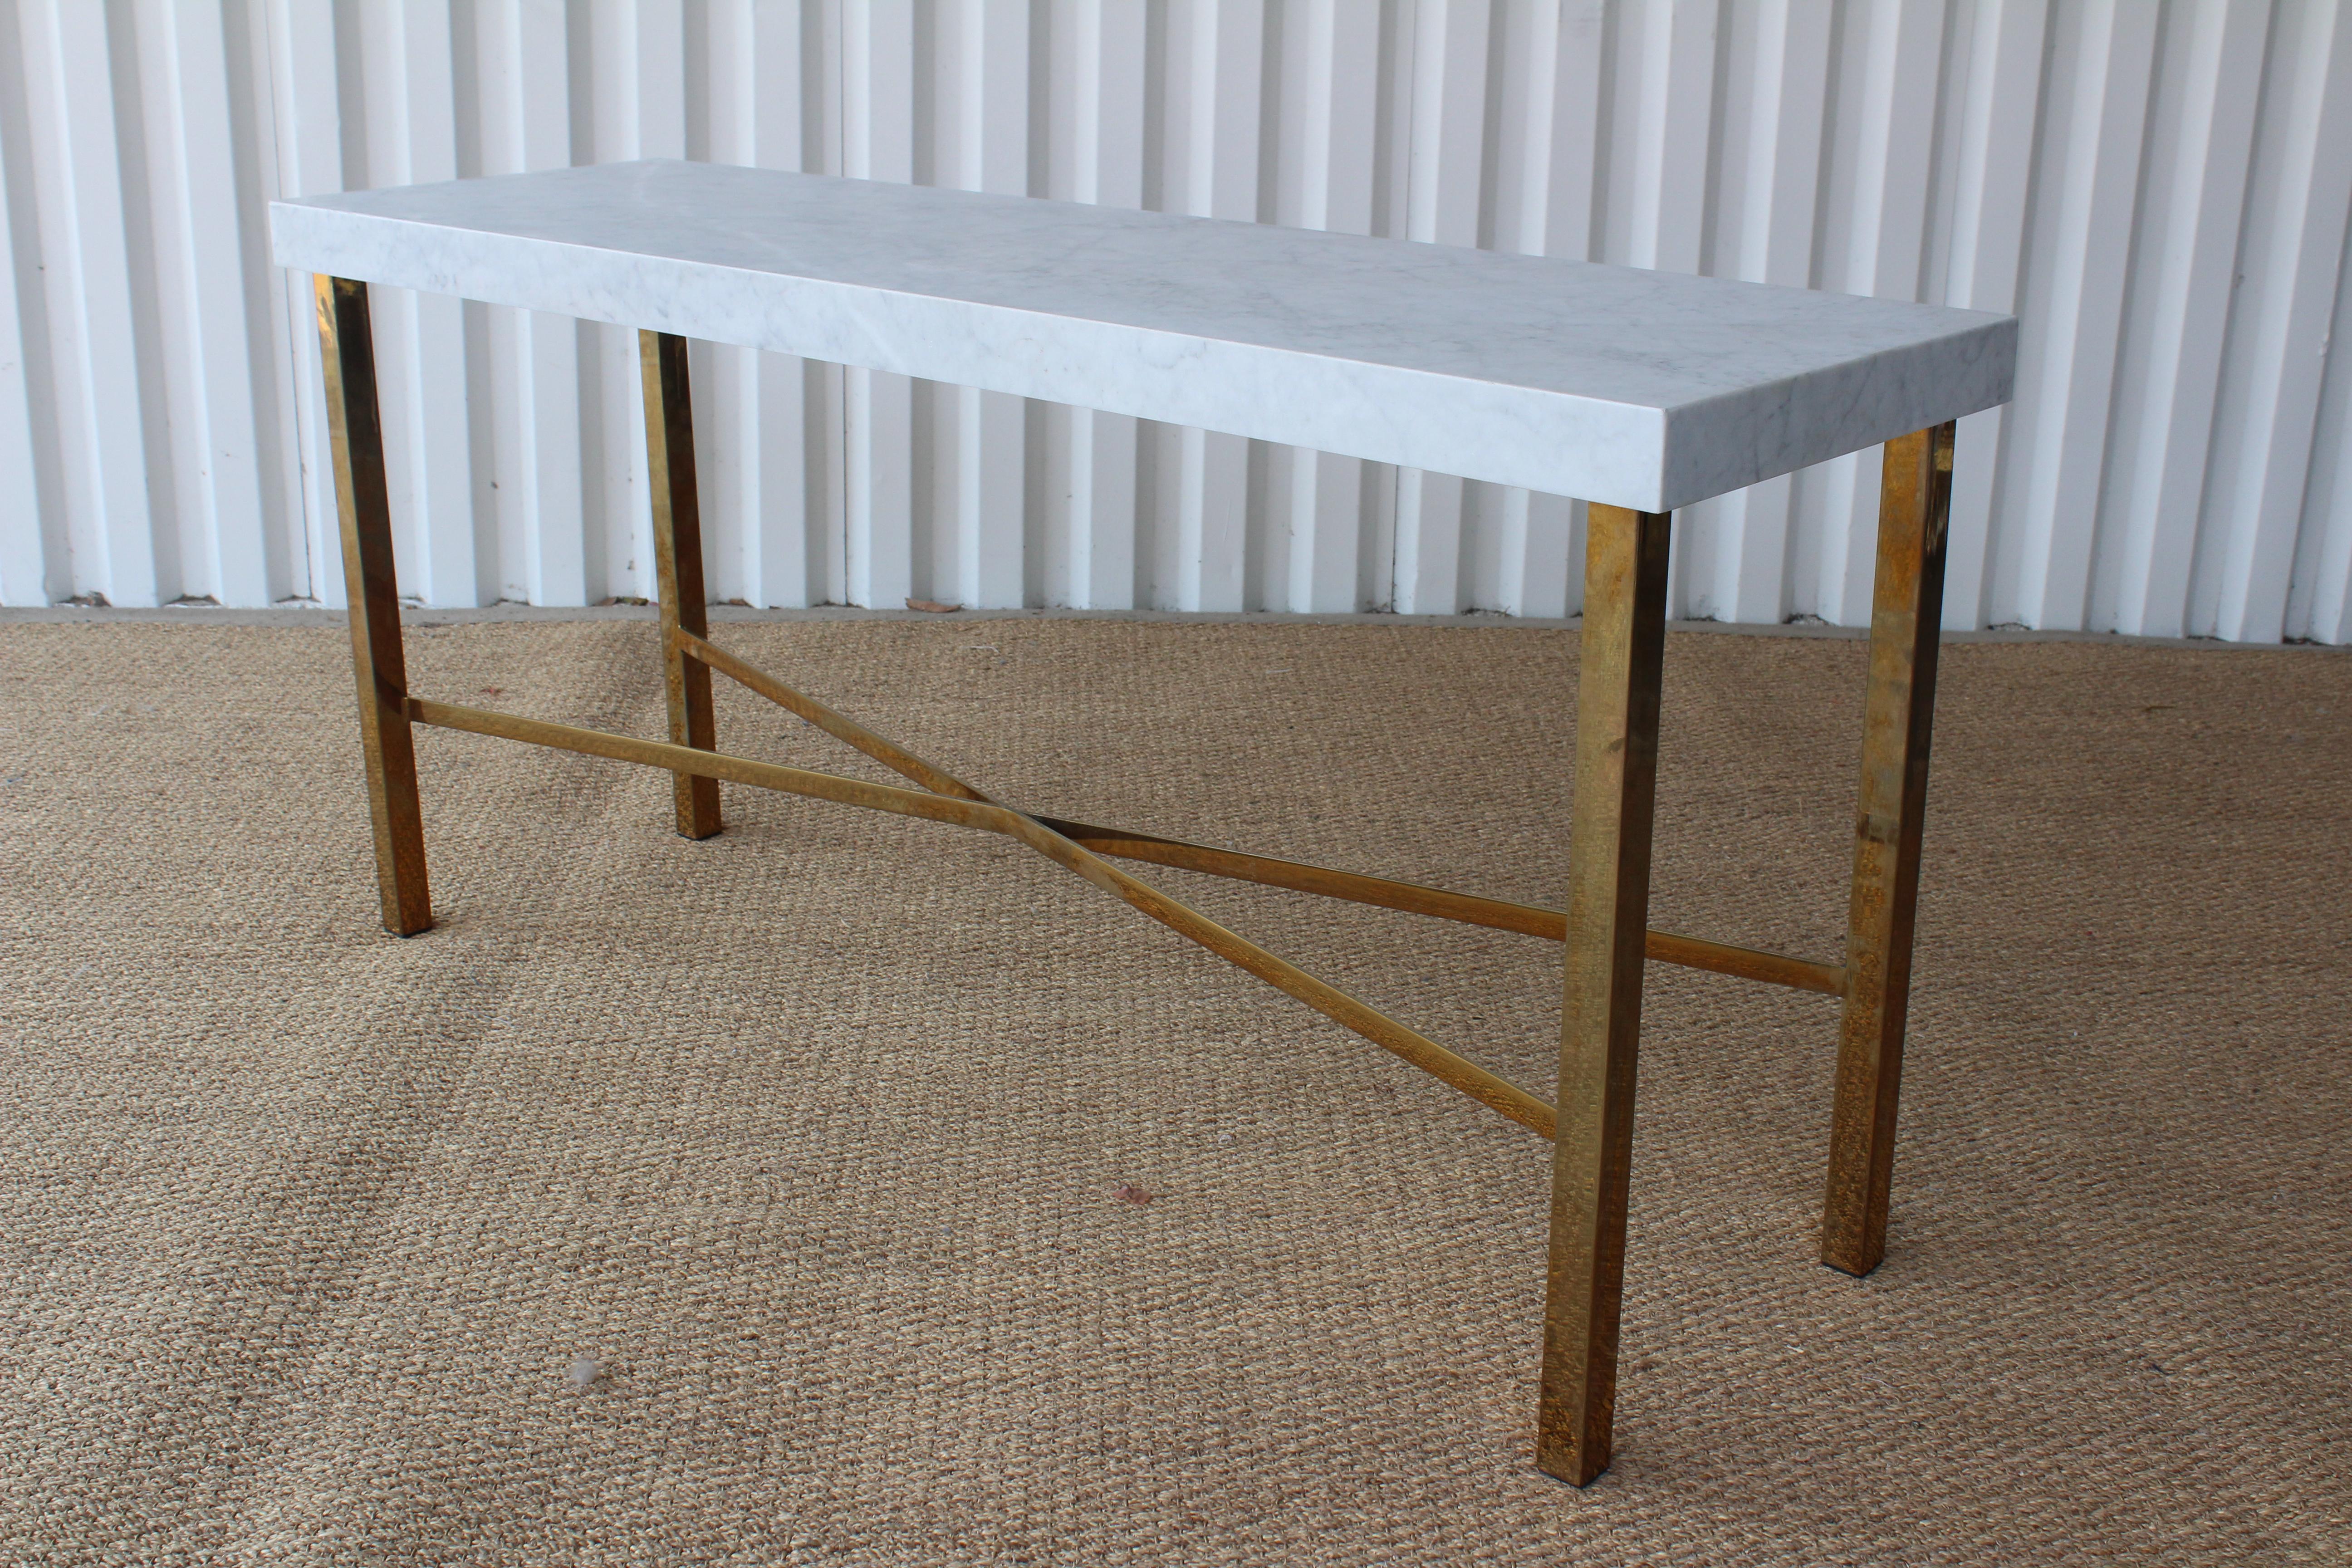 Brass-plated console table with marble top, U.S.A, 1970s. Brass shows age appropriate patina.